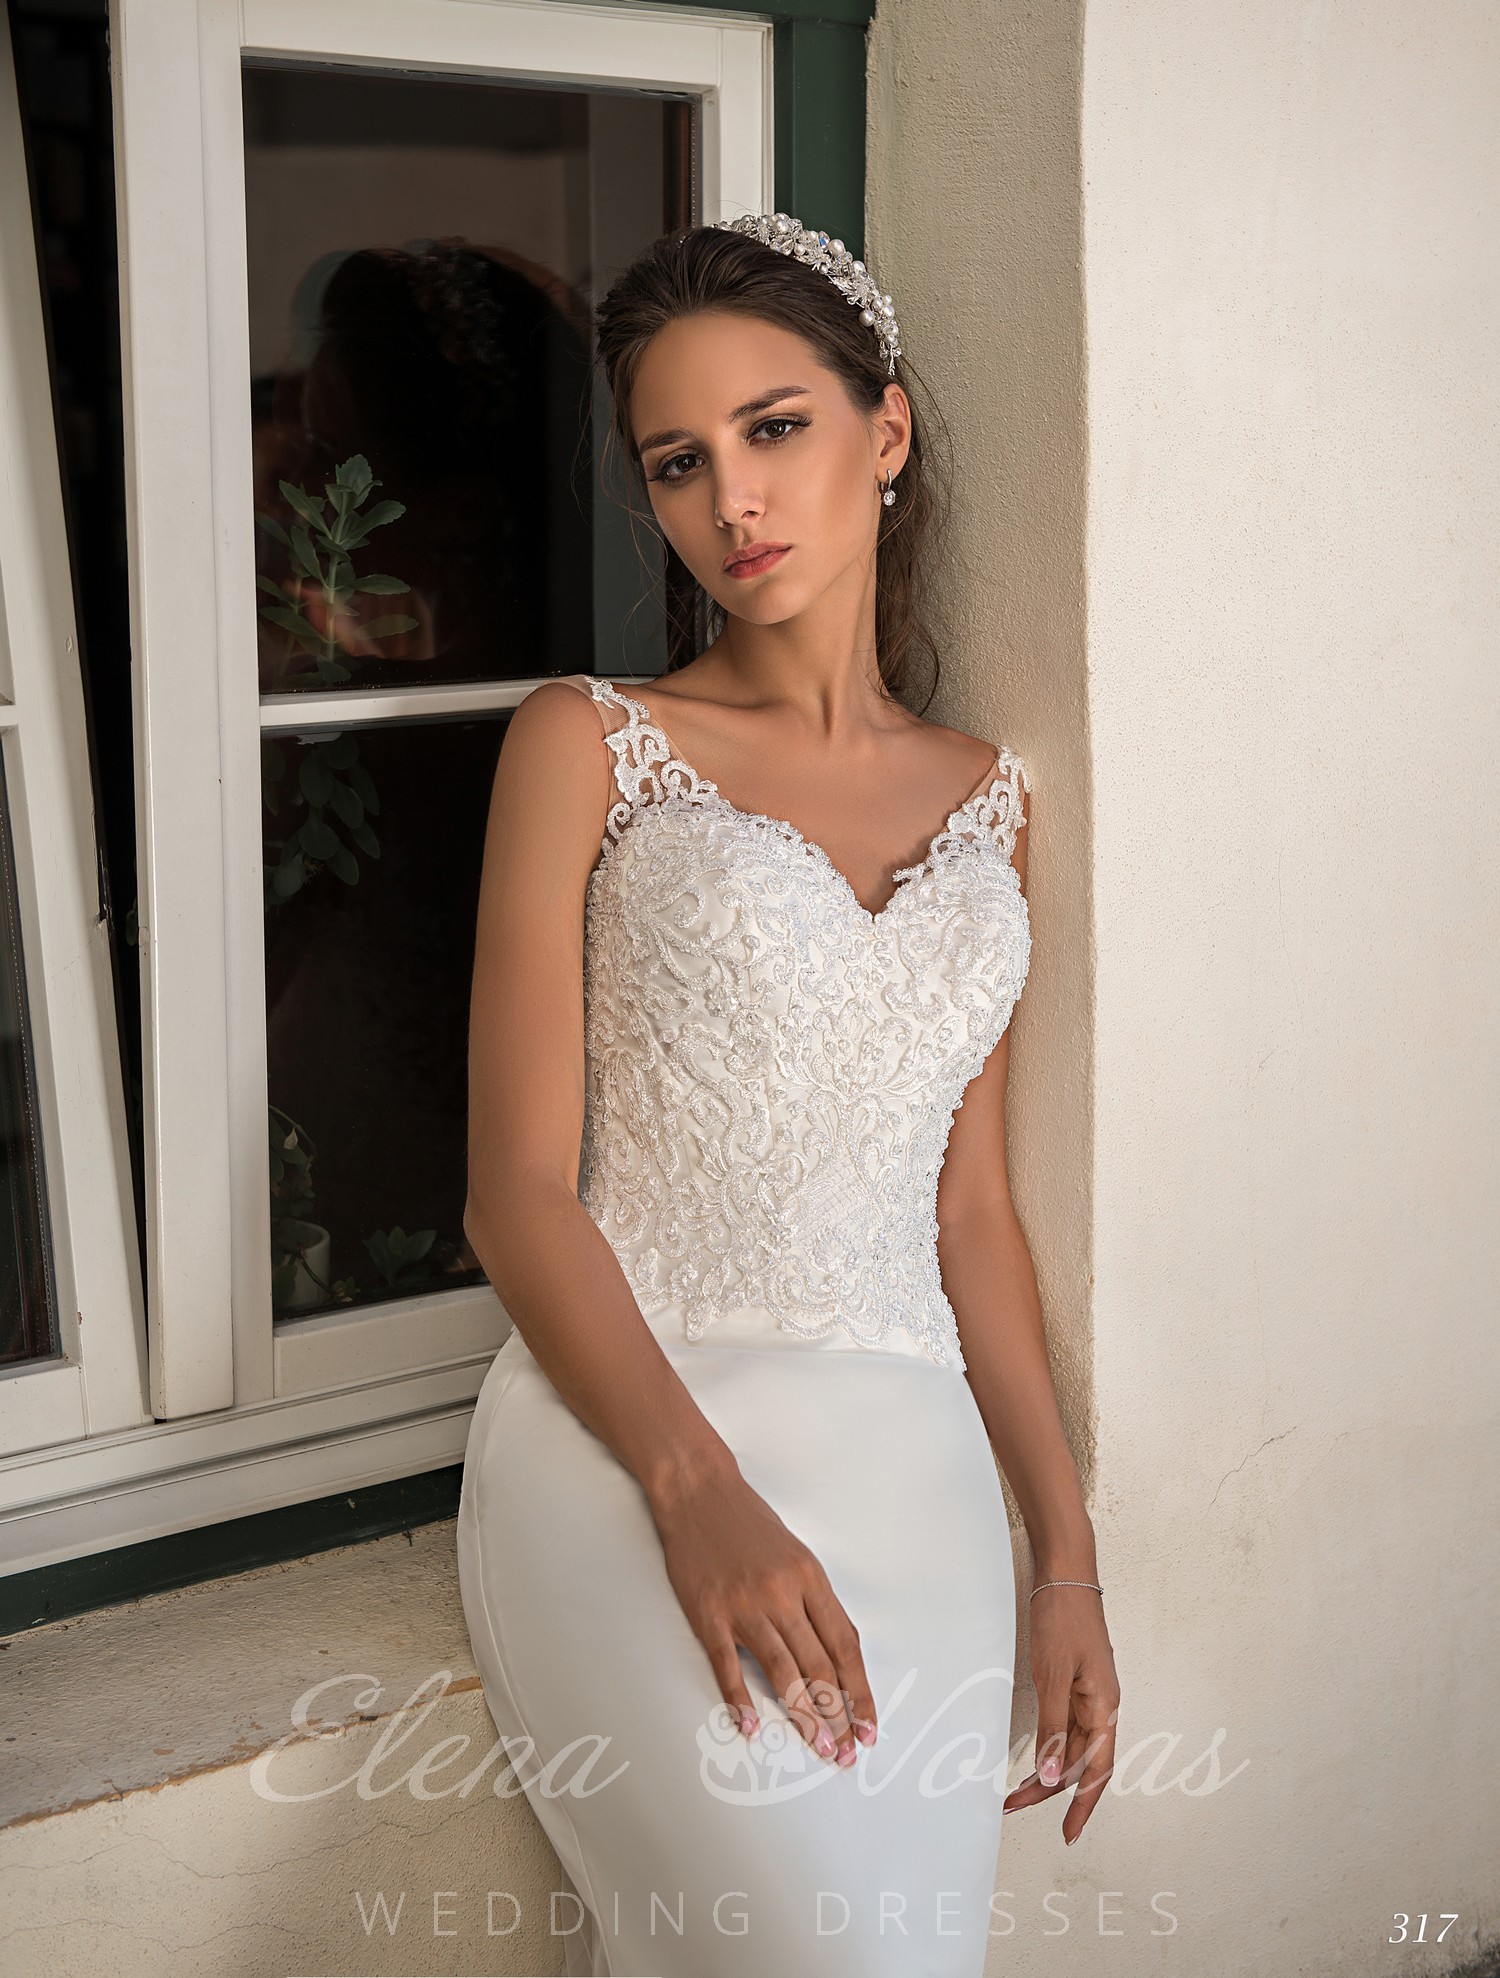 A tight wedding dress with straps on wholesale